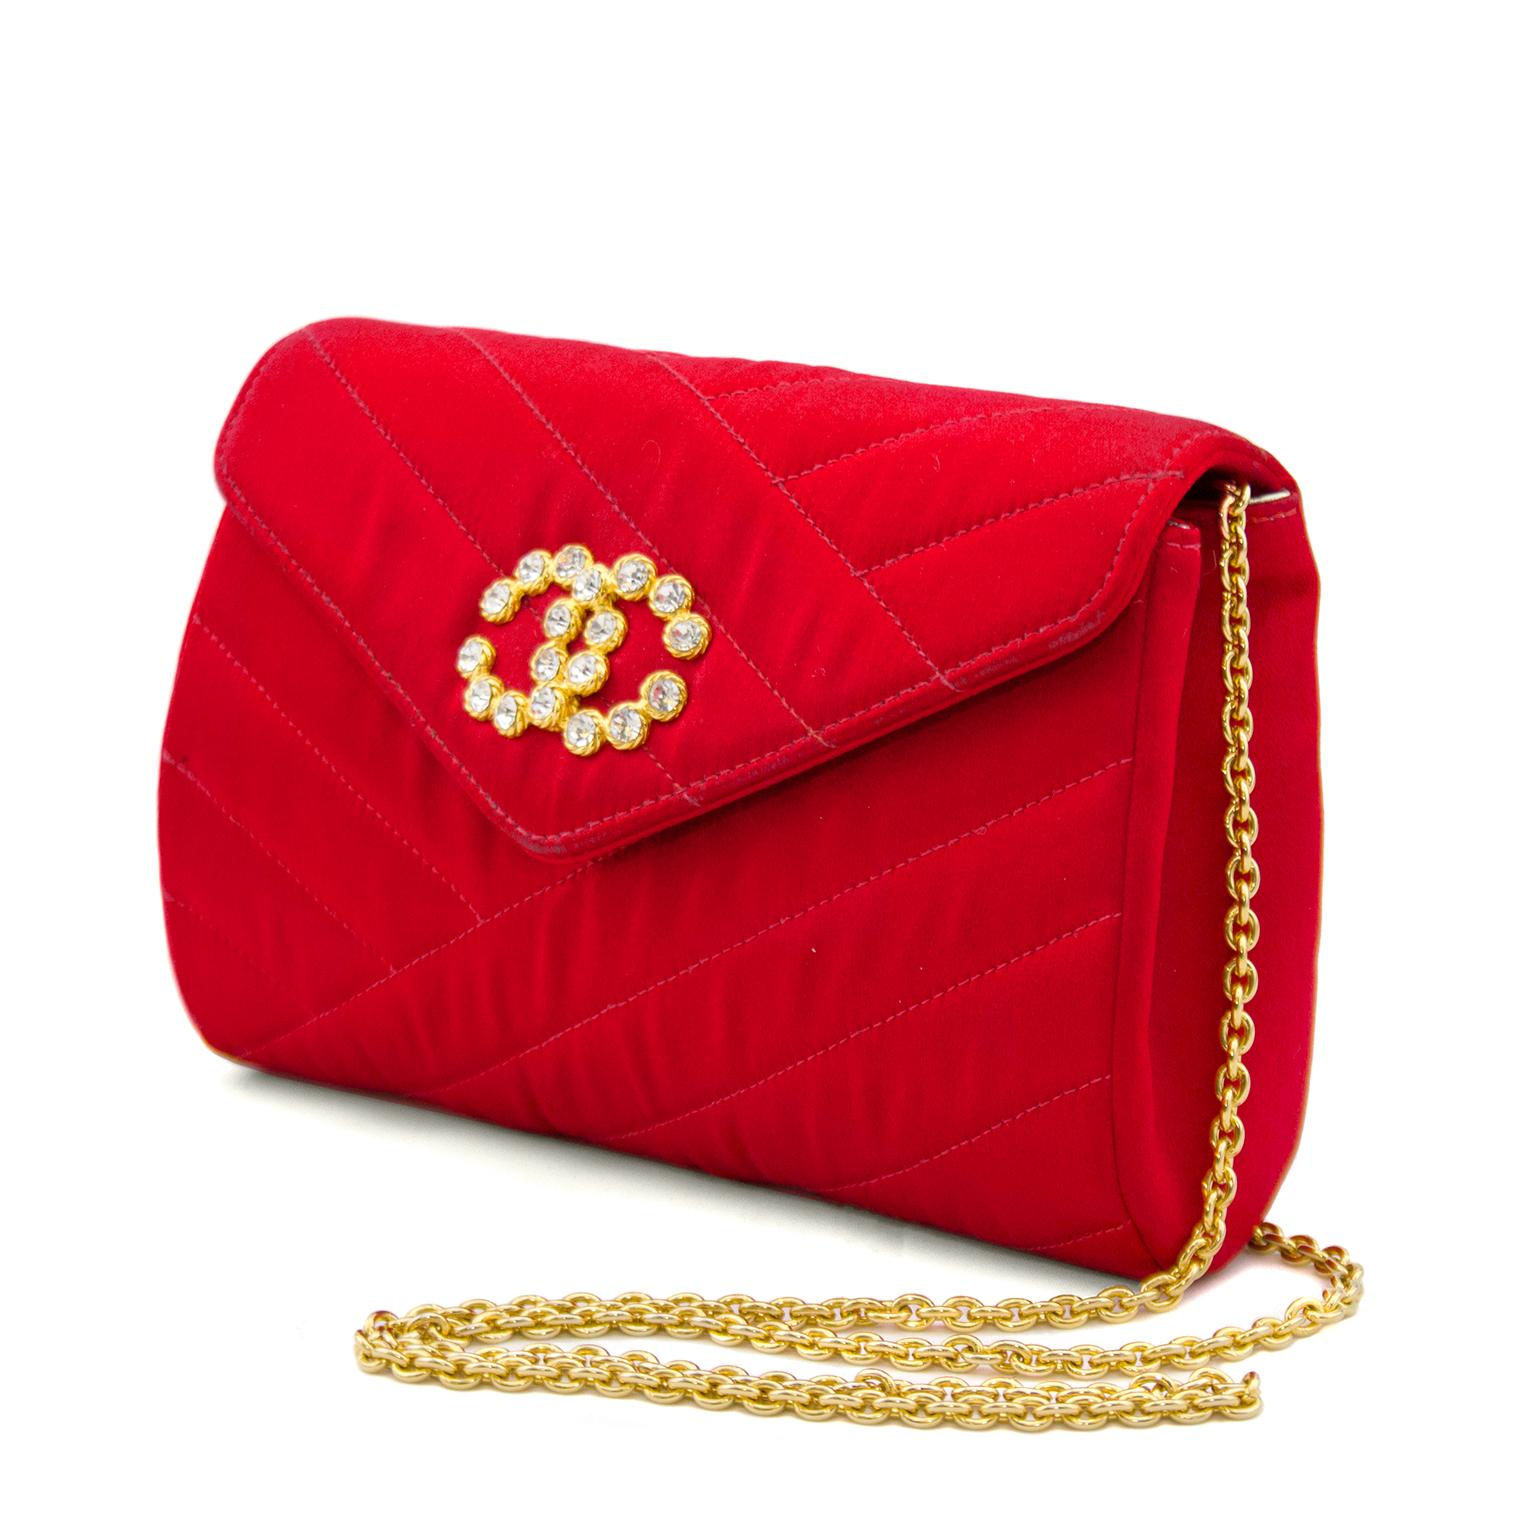 Bright red satin Chanel evening bag from the late 1980s. Diagonal line quilting covers the whole purse and the pointed top flap has a rhinestone CC on the front and closes with a hidden magnetic snap. Interior is in immaculate condition, lined in